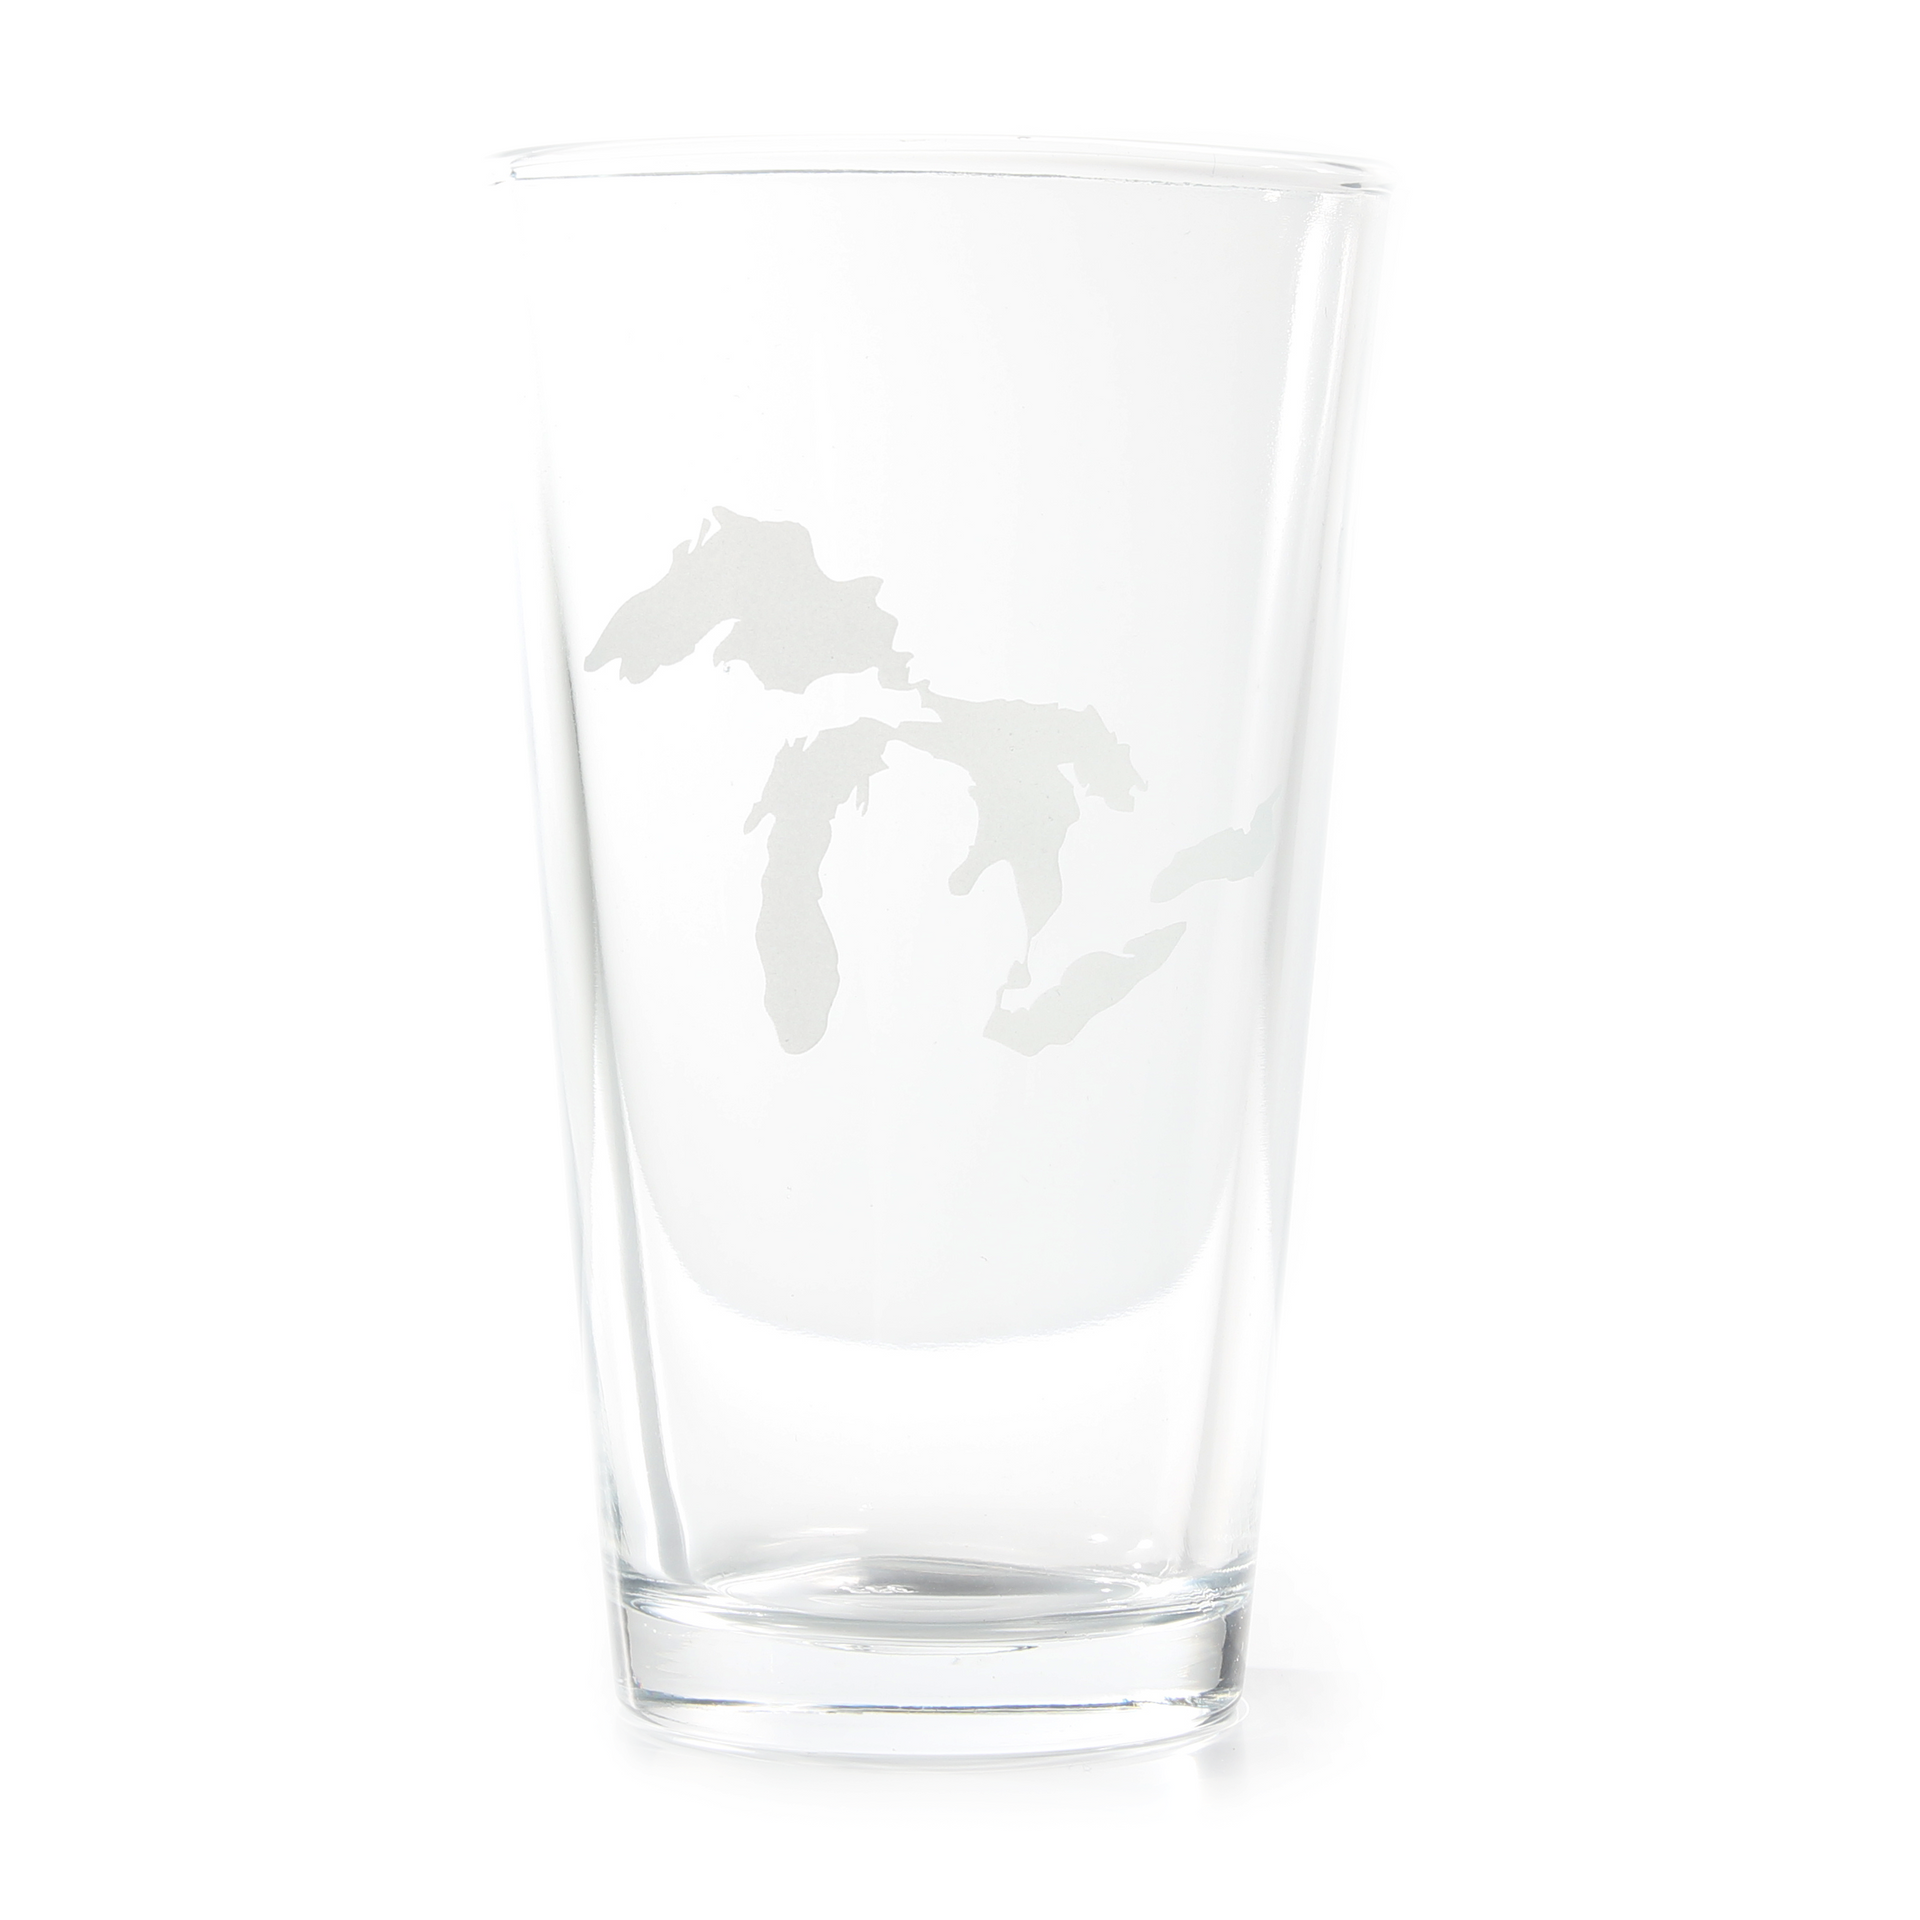 Etched Pint Glasses